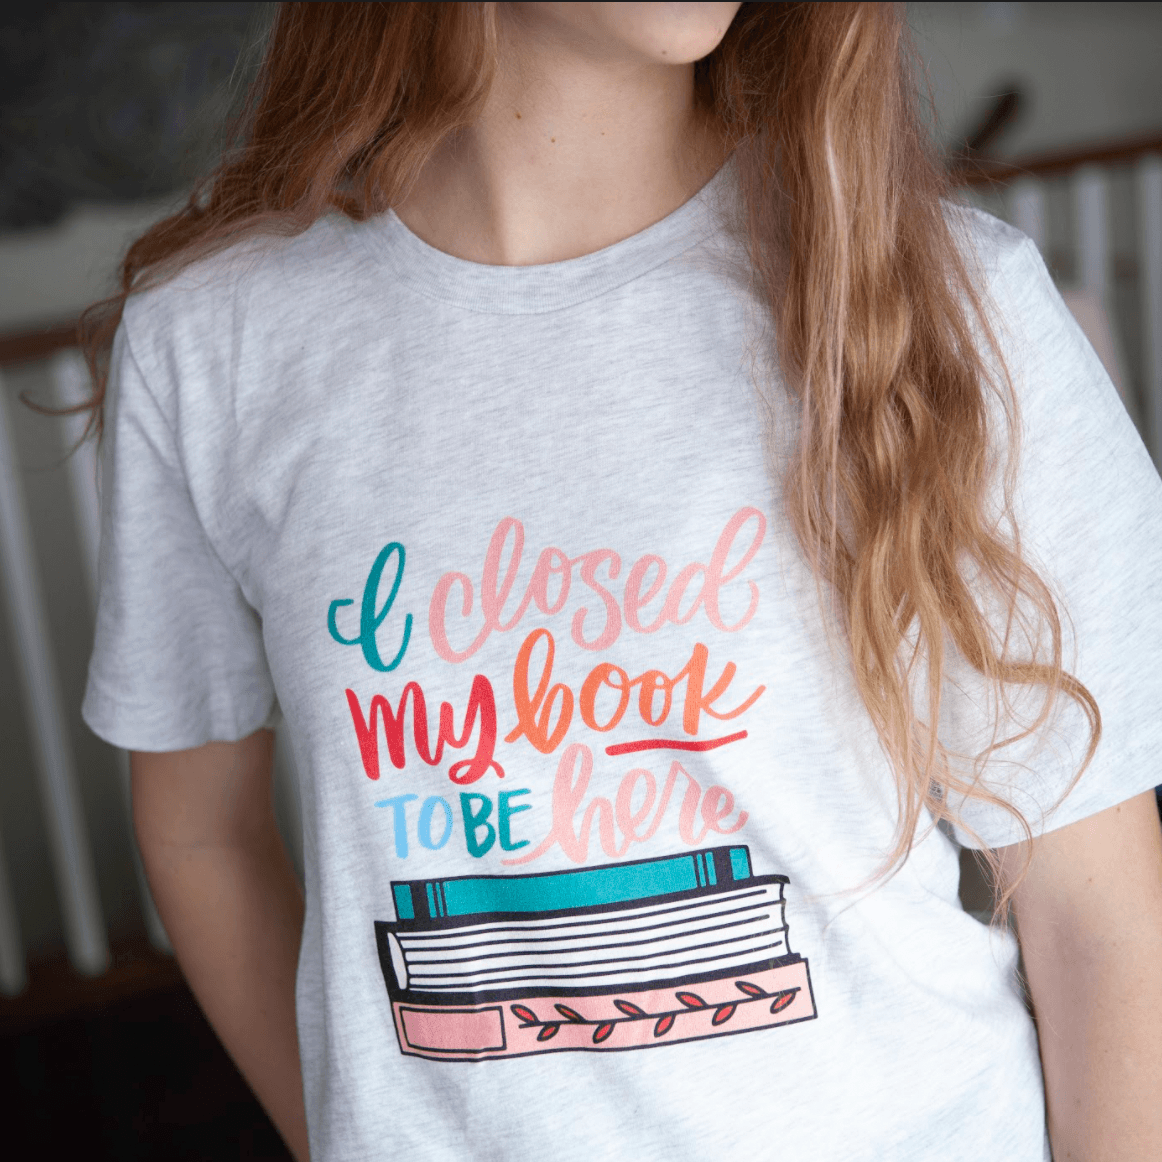 I Closed My Book To Be Here Short Sleeve Tee is a t-shirt with a colorful stack of books and the quote &quot;I closed my book to be here&quot;